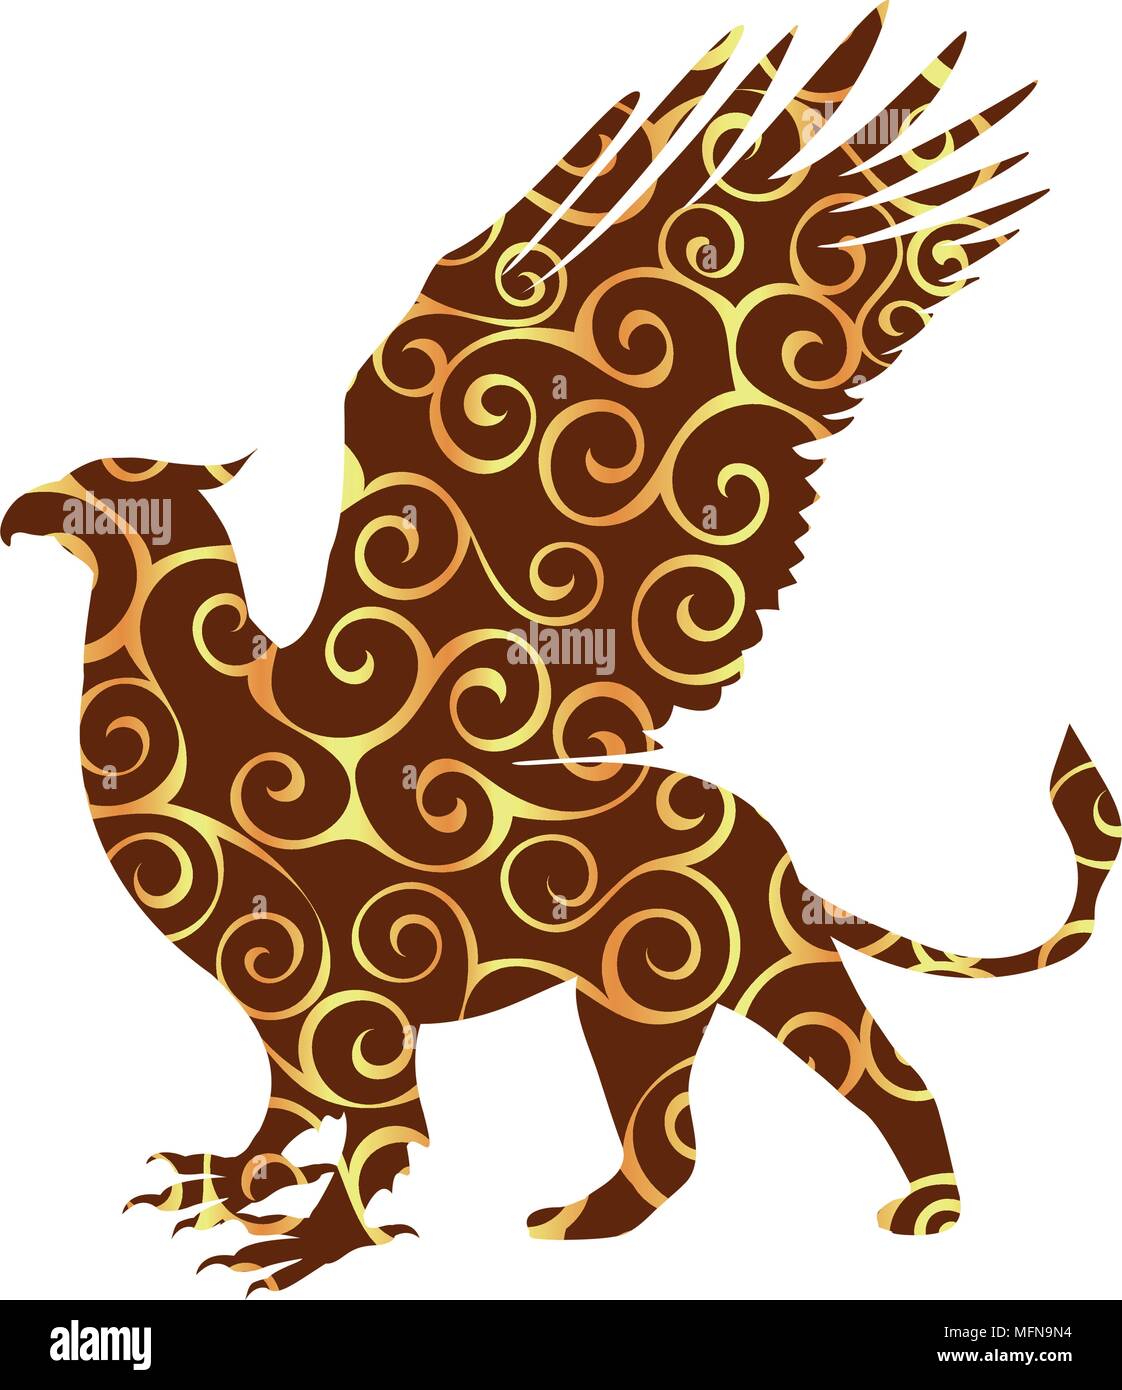 Griffin pattern silhouette ancient mythology fantasy. Vector illustration. Stock Vector